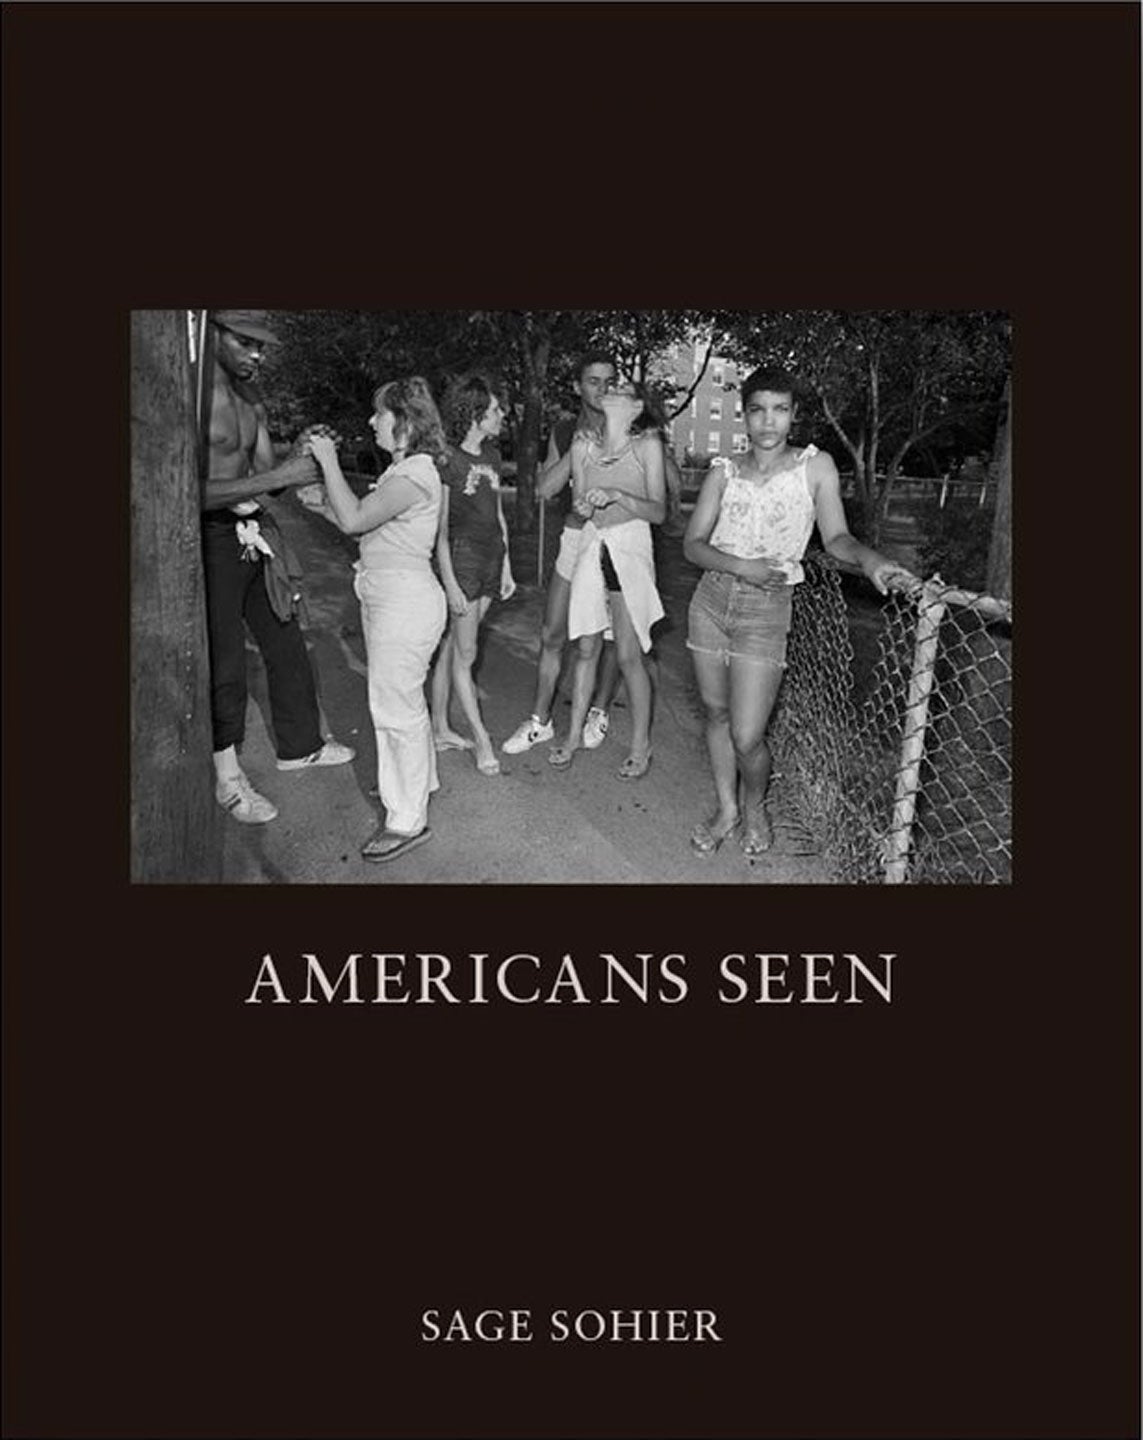 NZ Library #3: Sage Sohier: Americans Seen, Limited Edition (NZ Library - Set Three) [SIGNED]